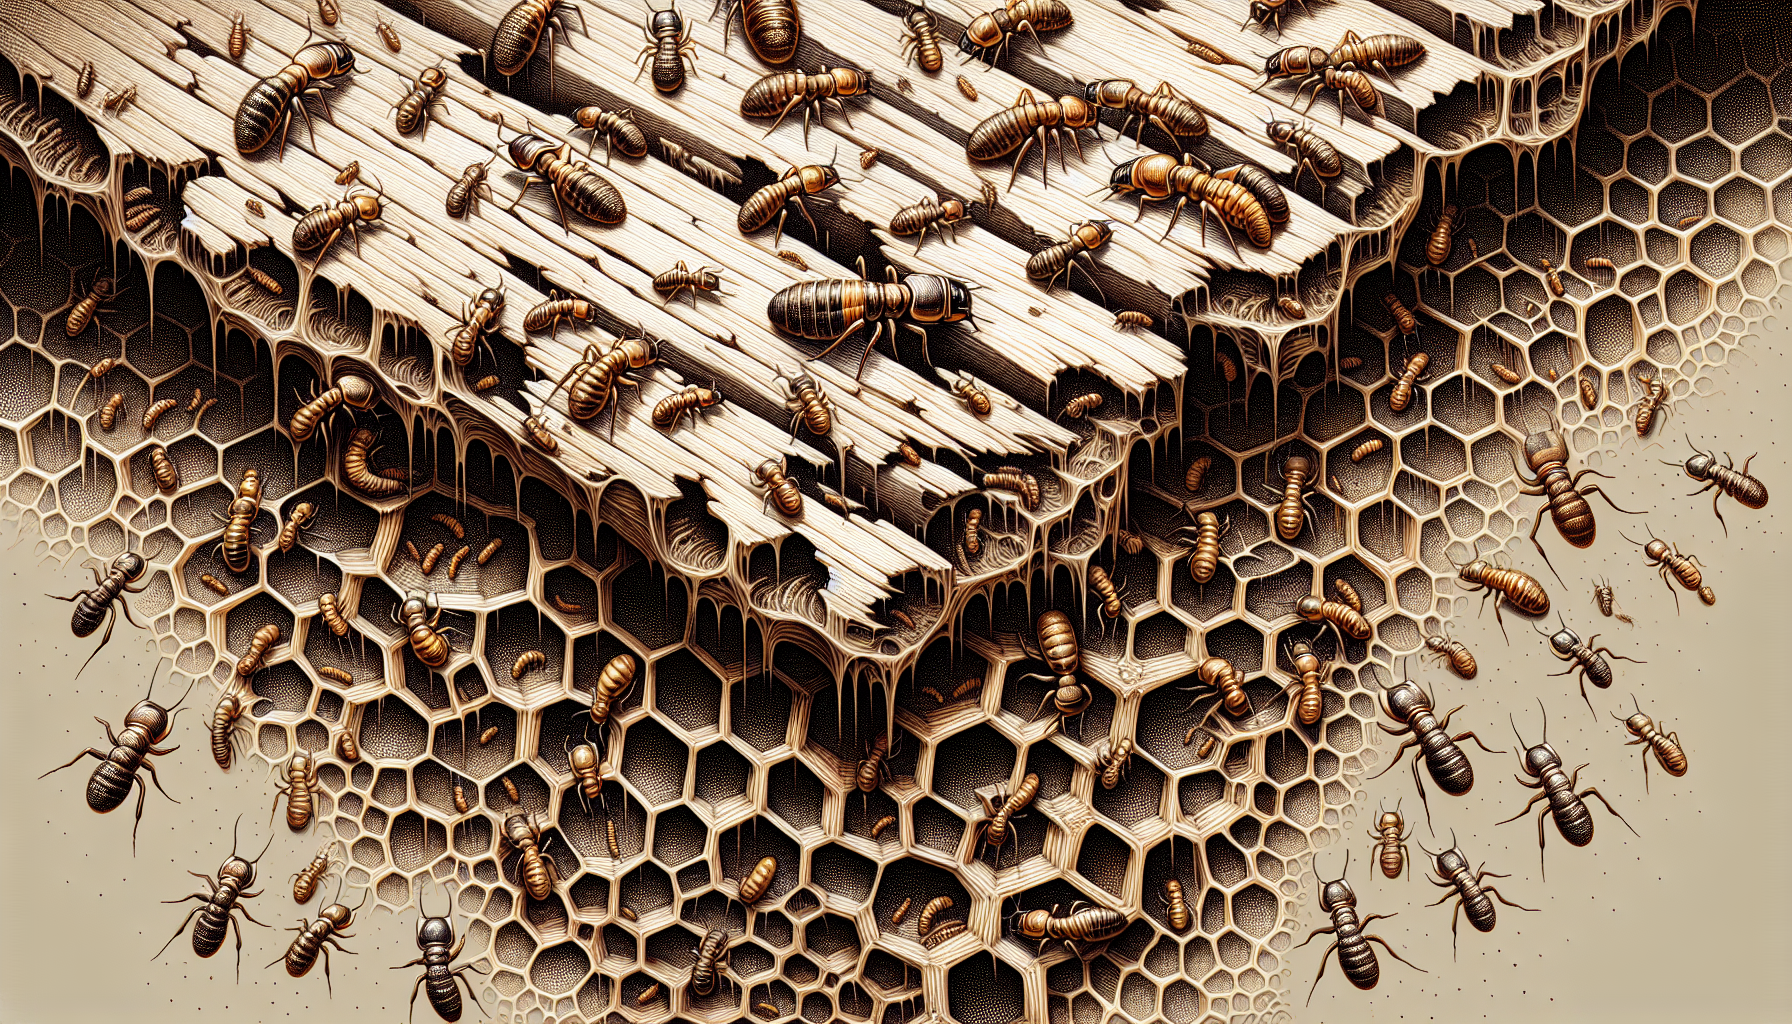 Formosan termites infesting wooden structures